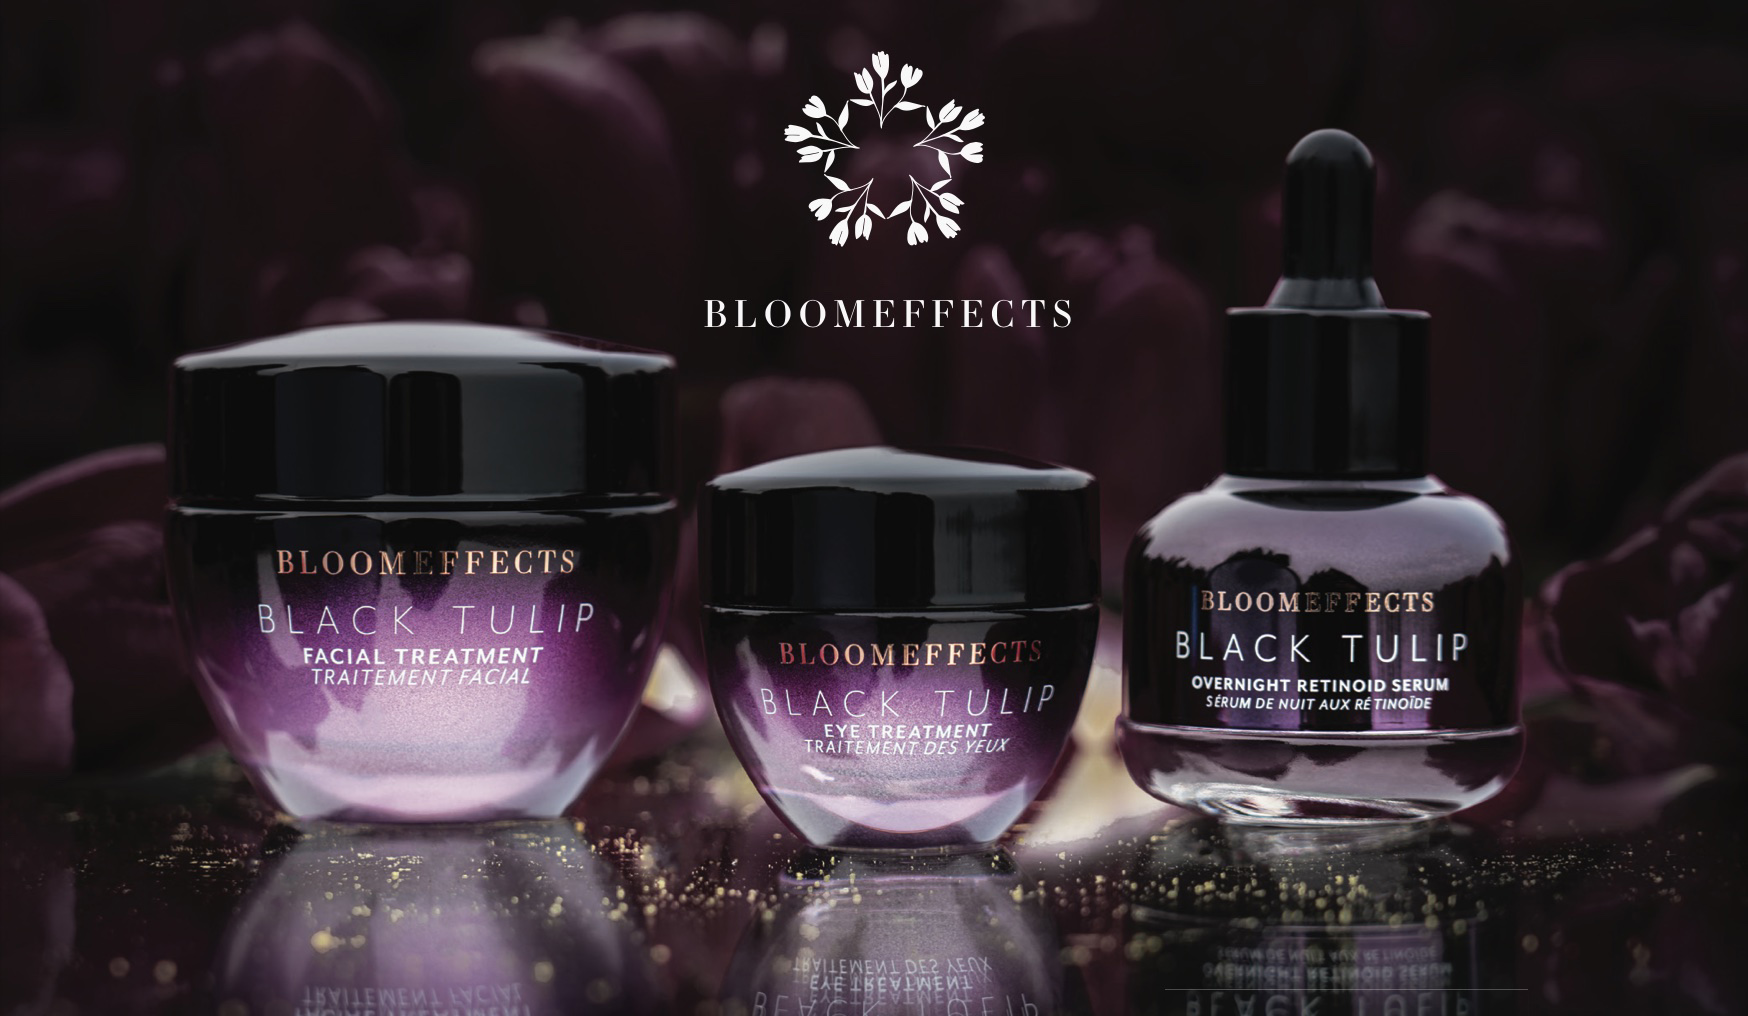 Bloomeffects Debuts Black Tulip Skincare Collection: Overnight Retinoid Serum, Eye Treatment, and Facial Treatment